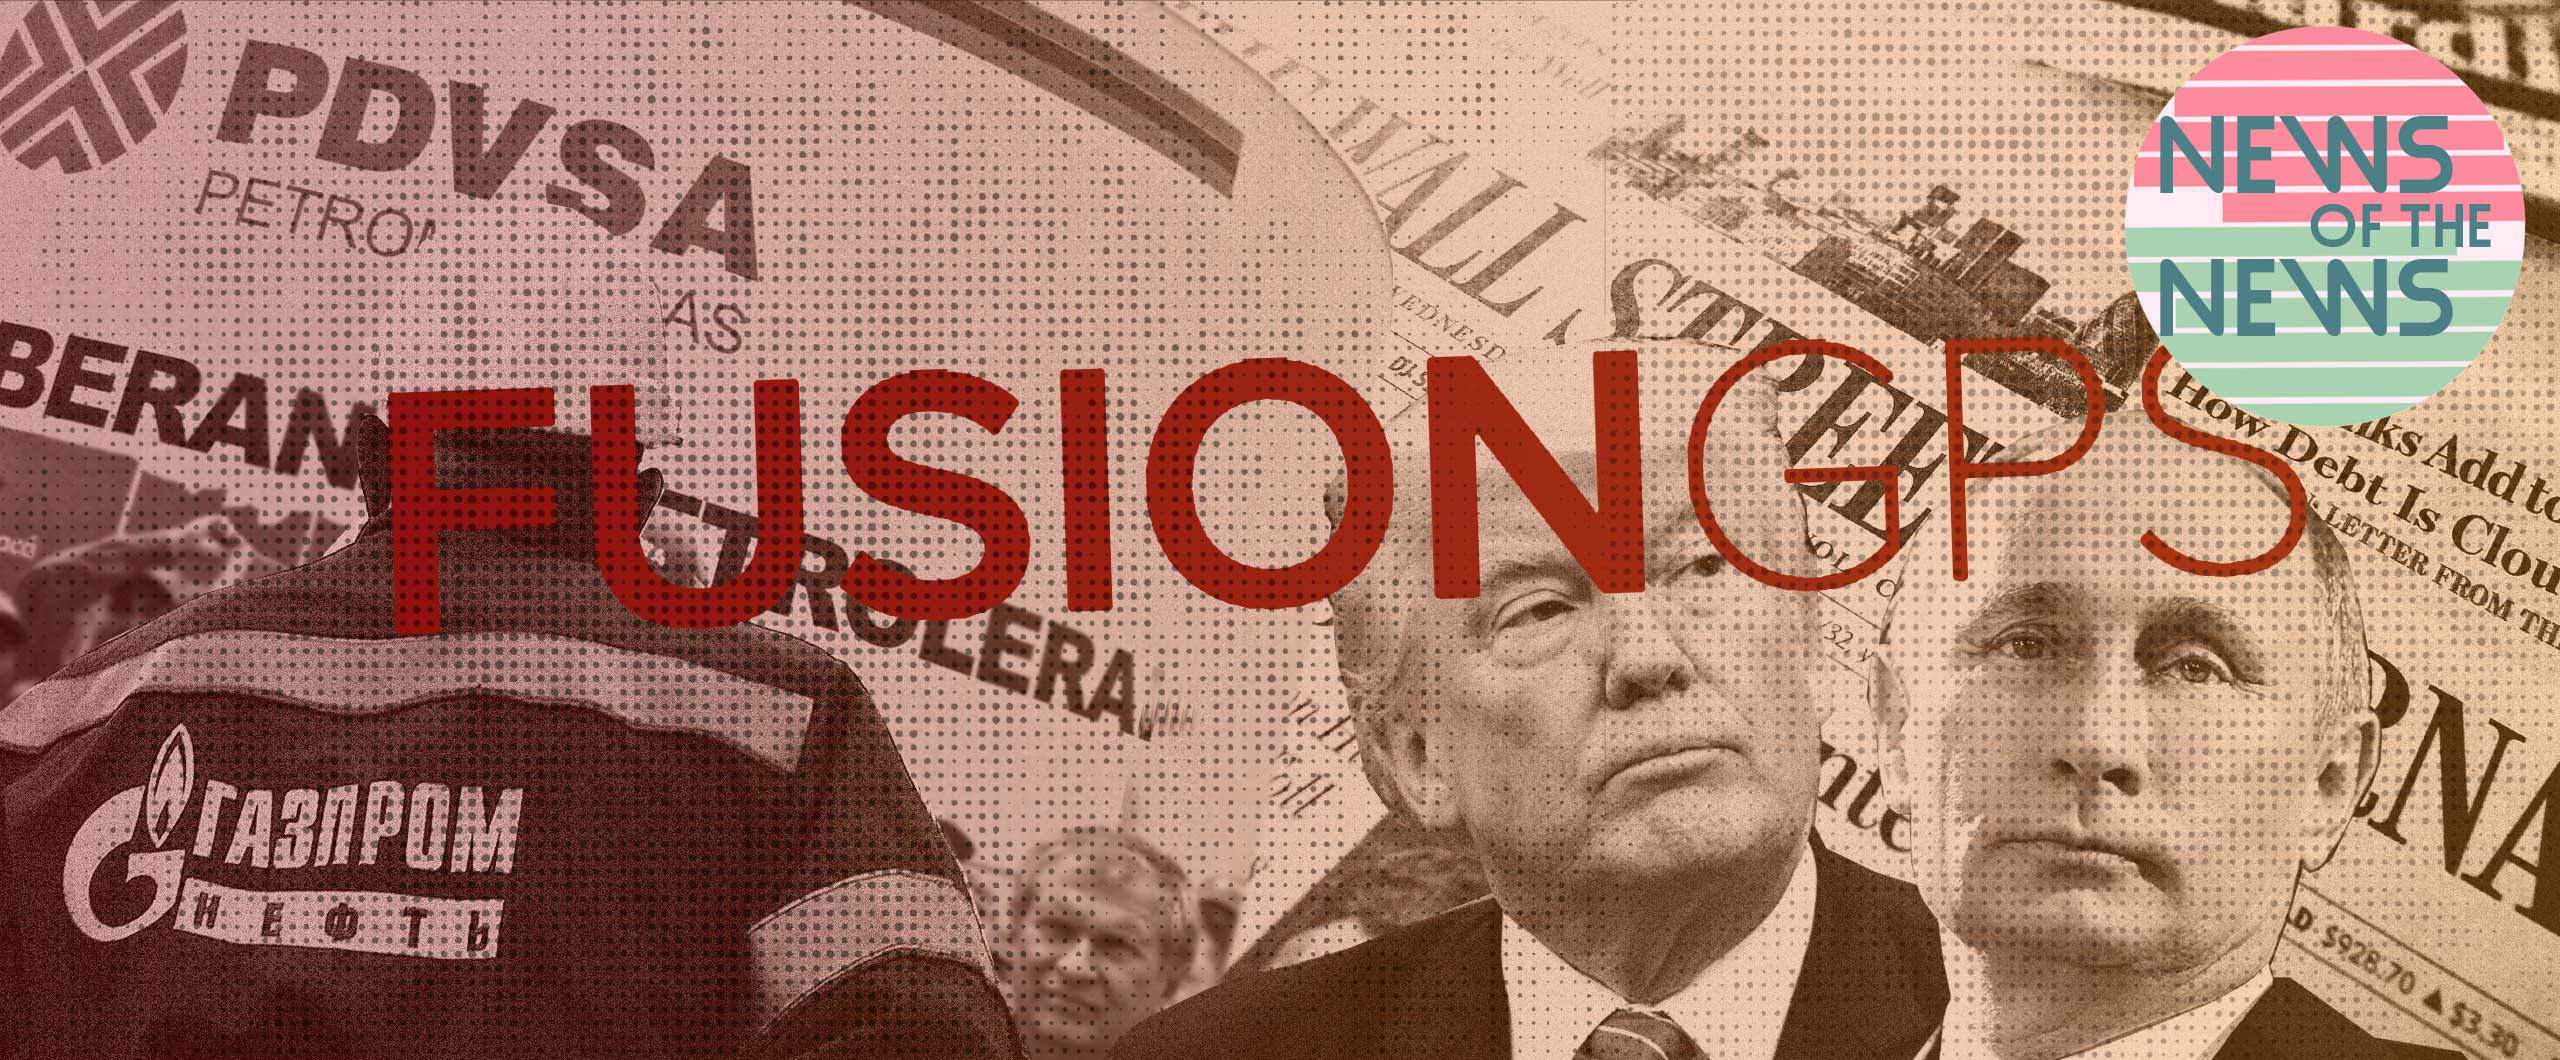 Alfa Bank Is Winning Fight with Fusion GPS for Records Related to the Bank – Fusion Claims Attorney-Client Privilege After Spreading Their Garbage Stories with Multiple Corrupt Media Outlets